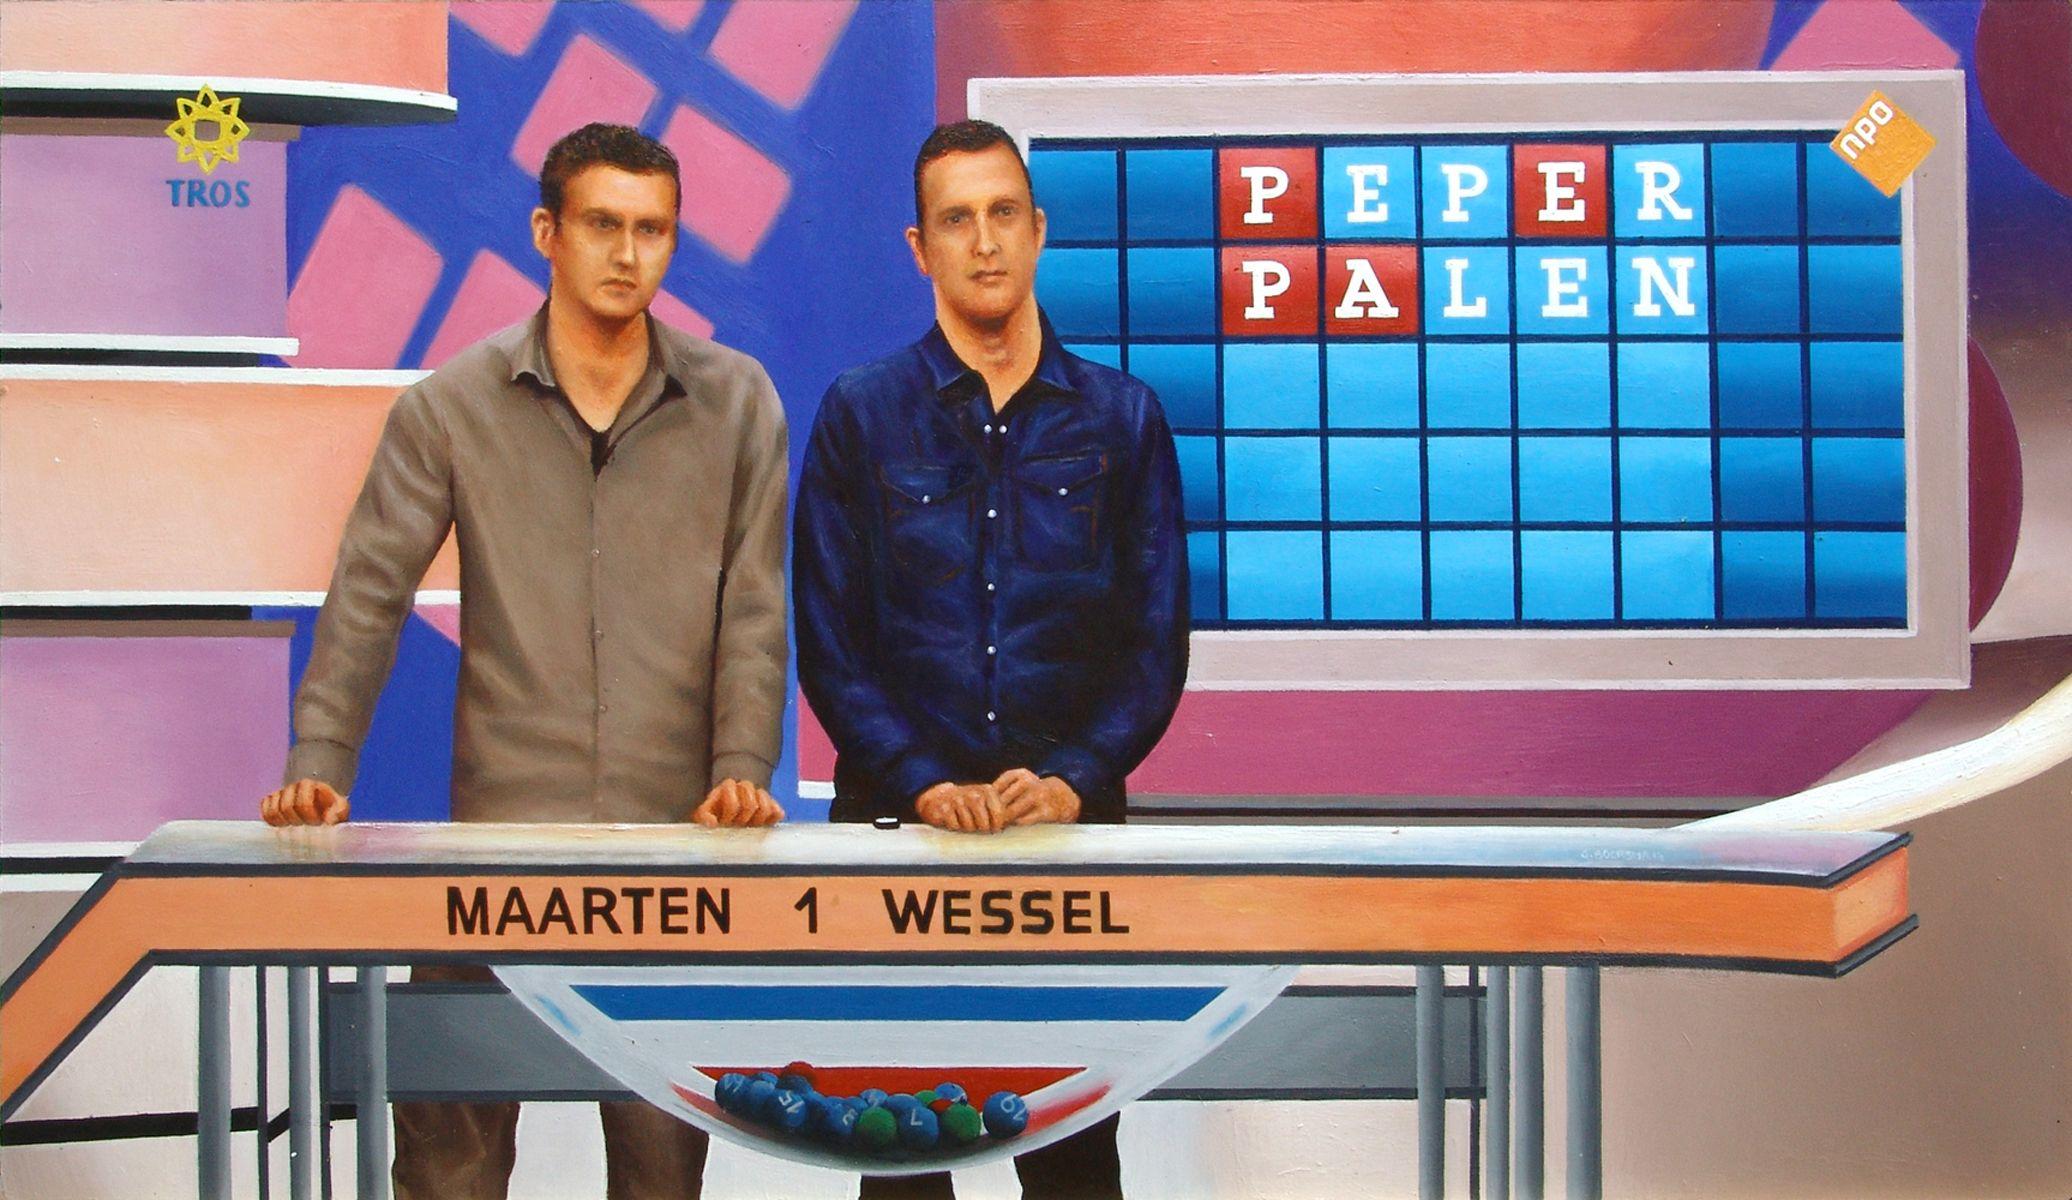 One night while watching television I stumbled upon this gameshow called Lingo where two teams have to guess a word within a maximum of five turns. Here you see team 1 with candidates Maarten and Wessel trying to guess a five letter word that starts